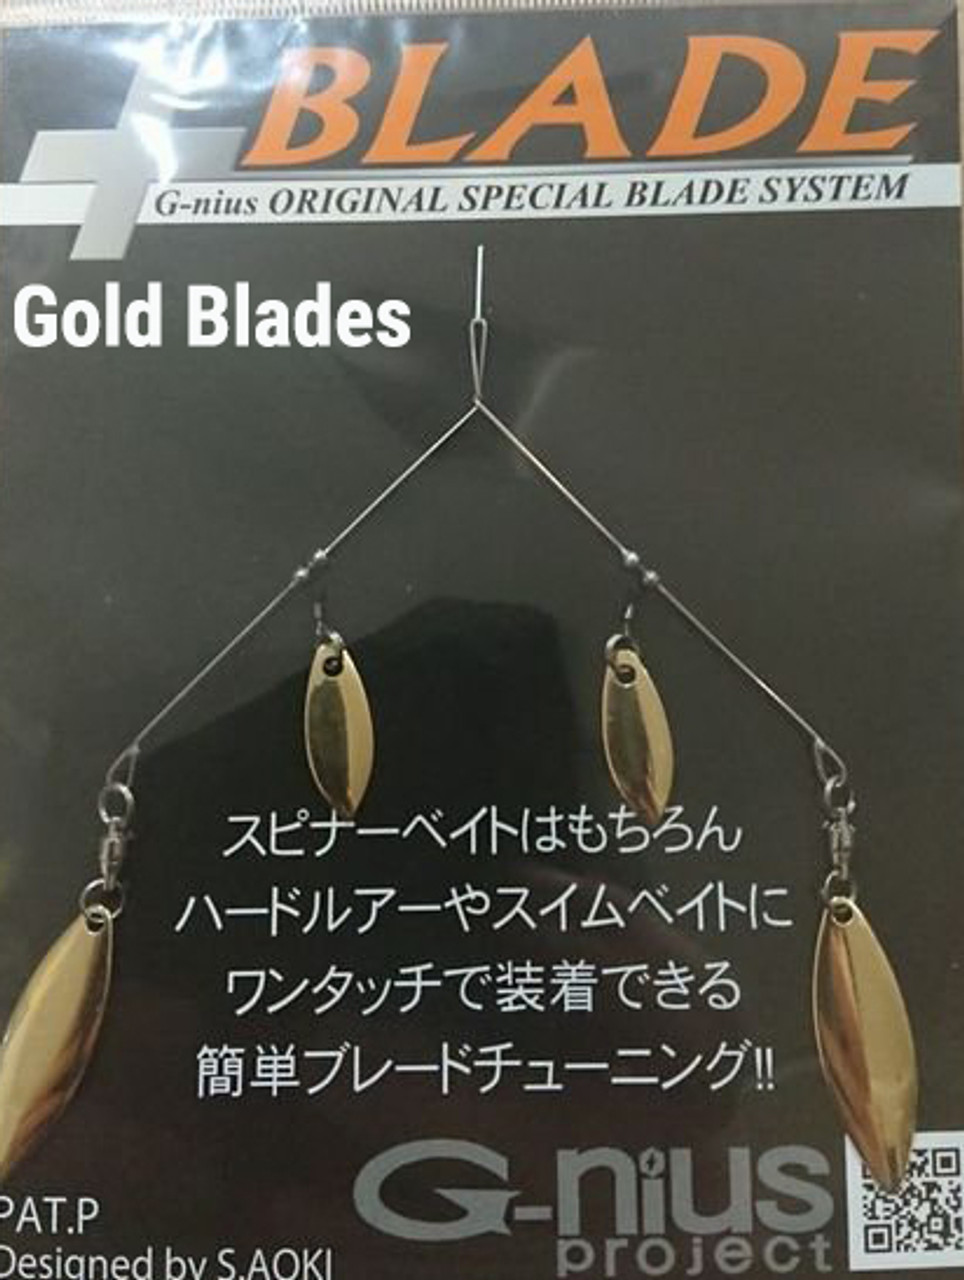 G-nius project PLUS BLADE NEW